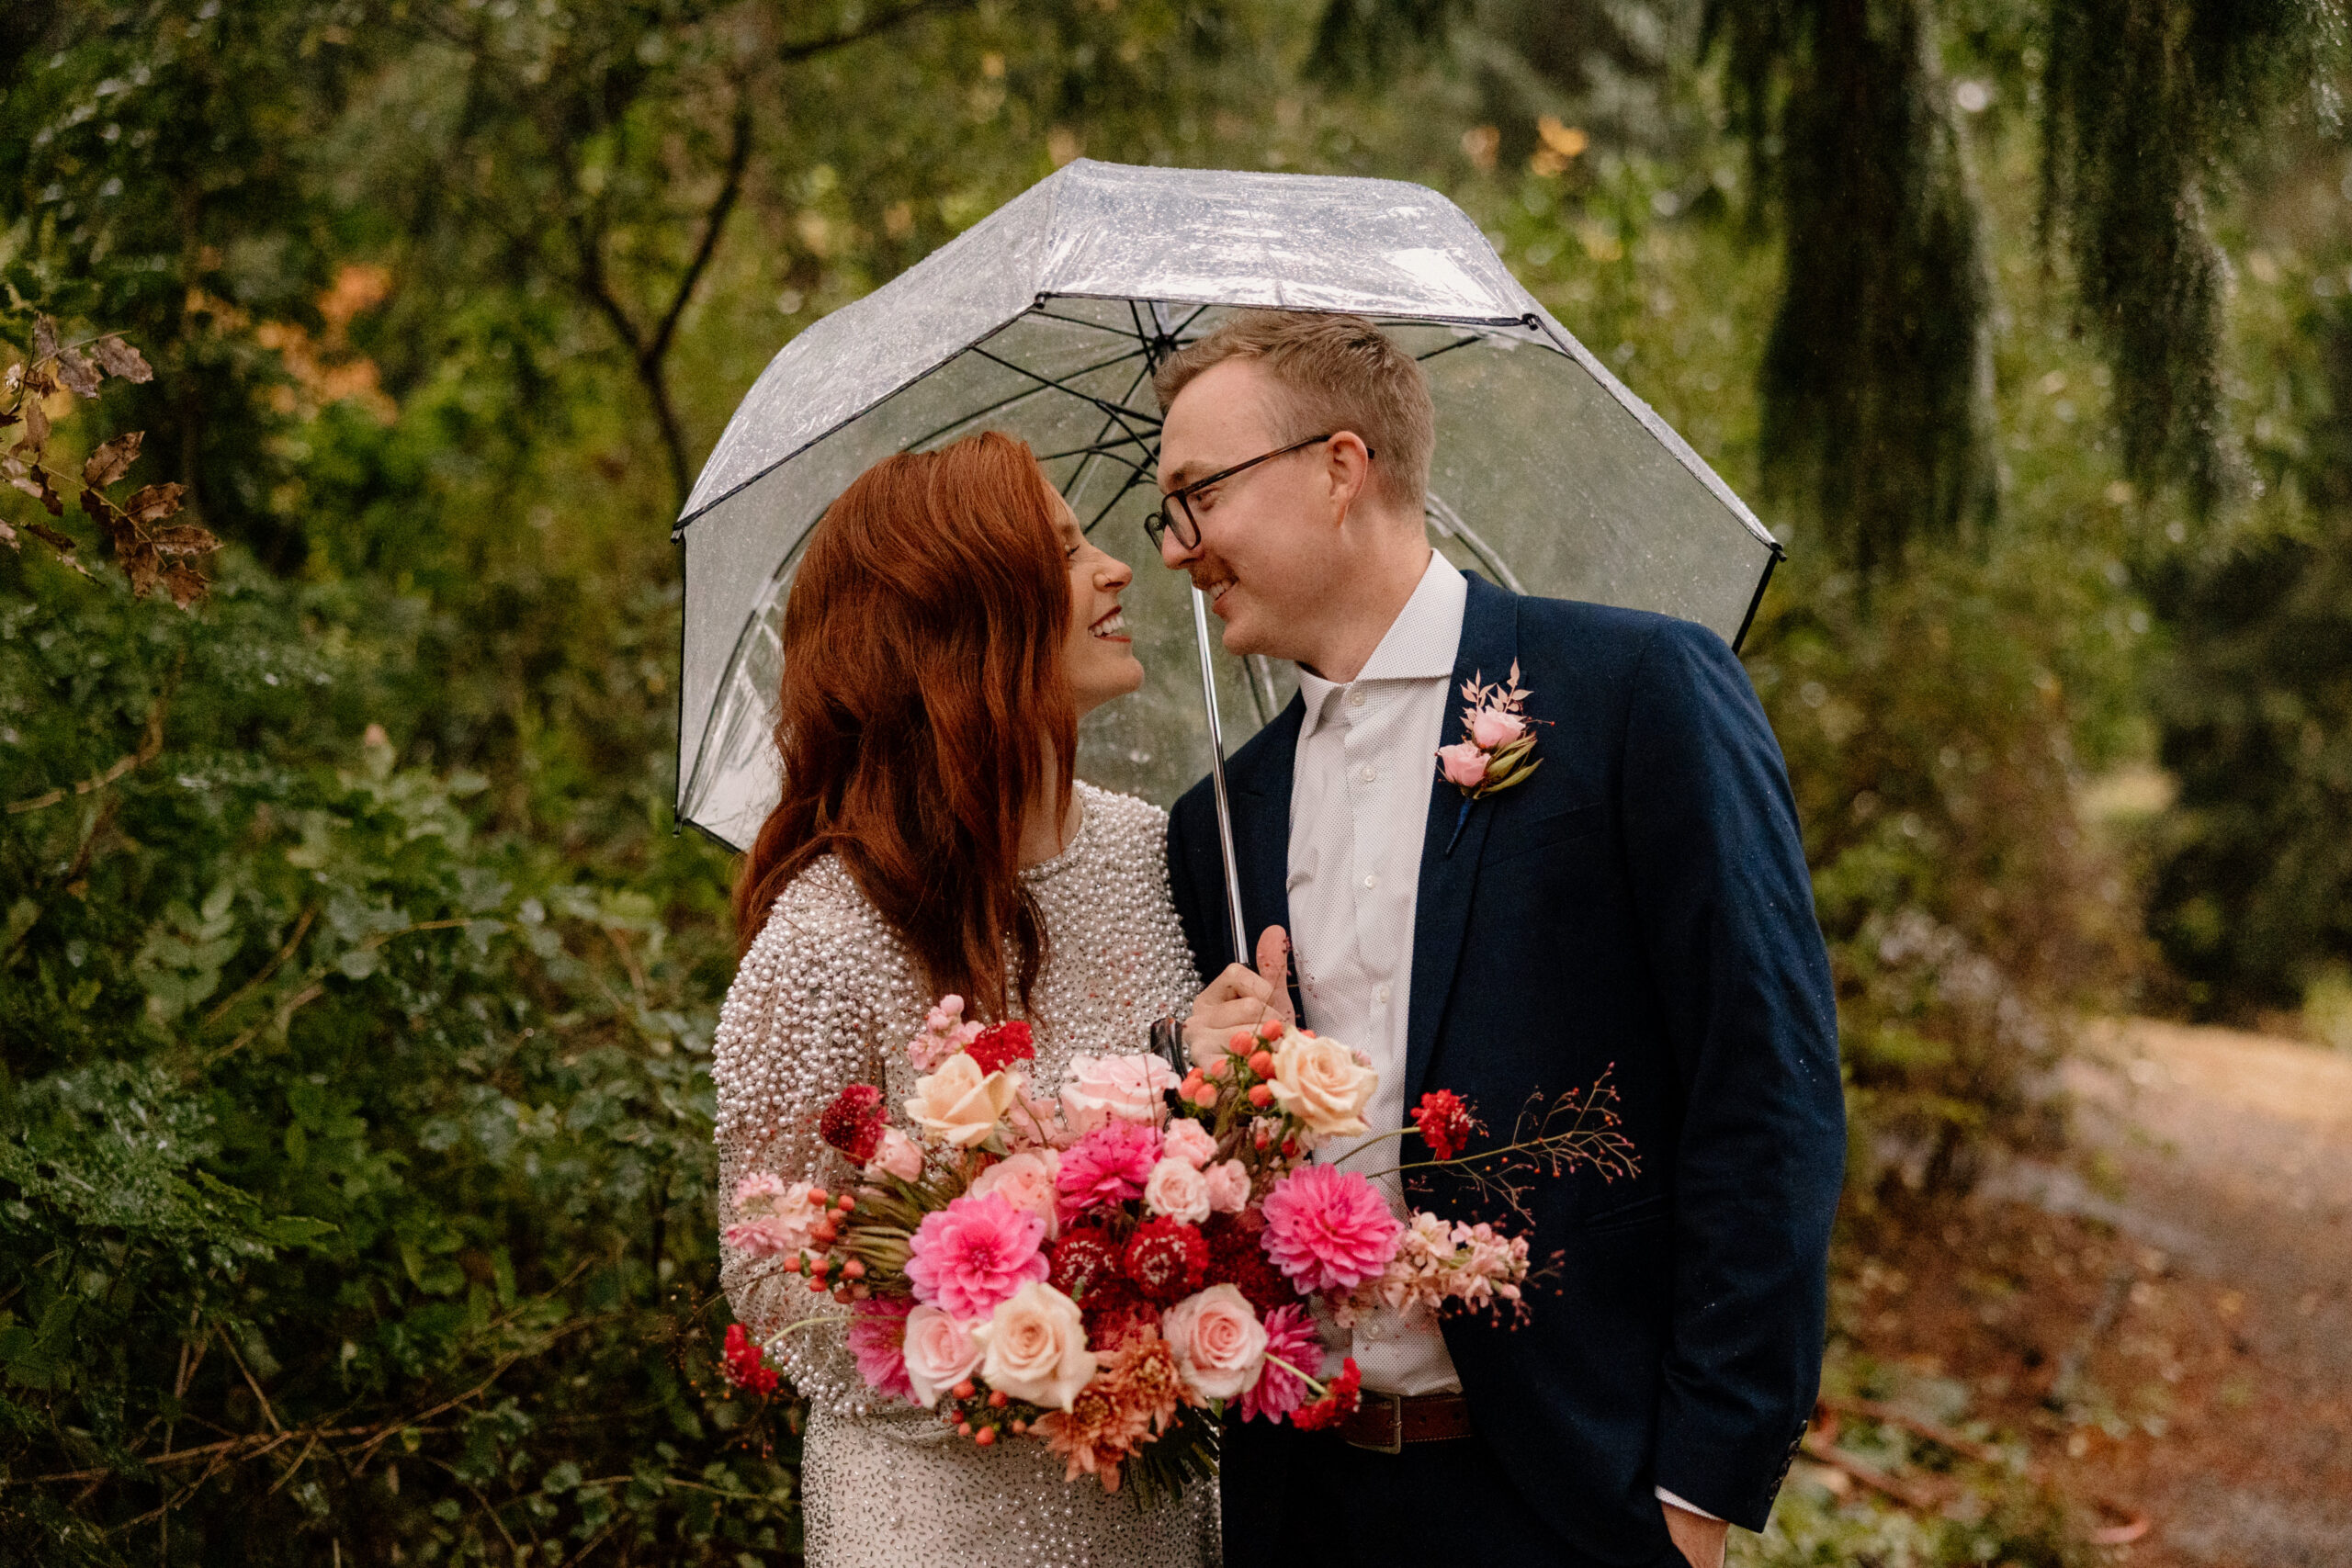 A laughing couple taking photos in the rain during their Hoyt Arboretum elopement.